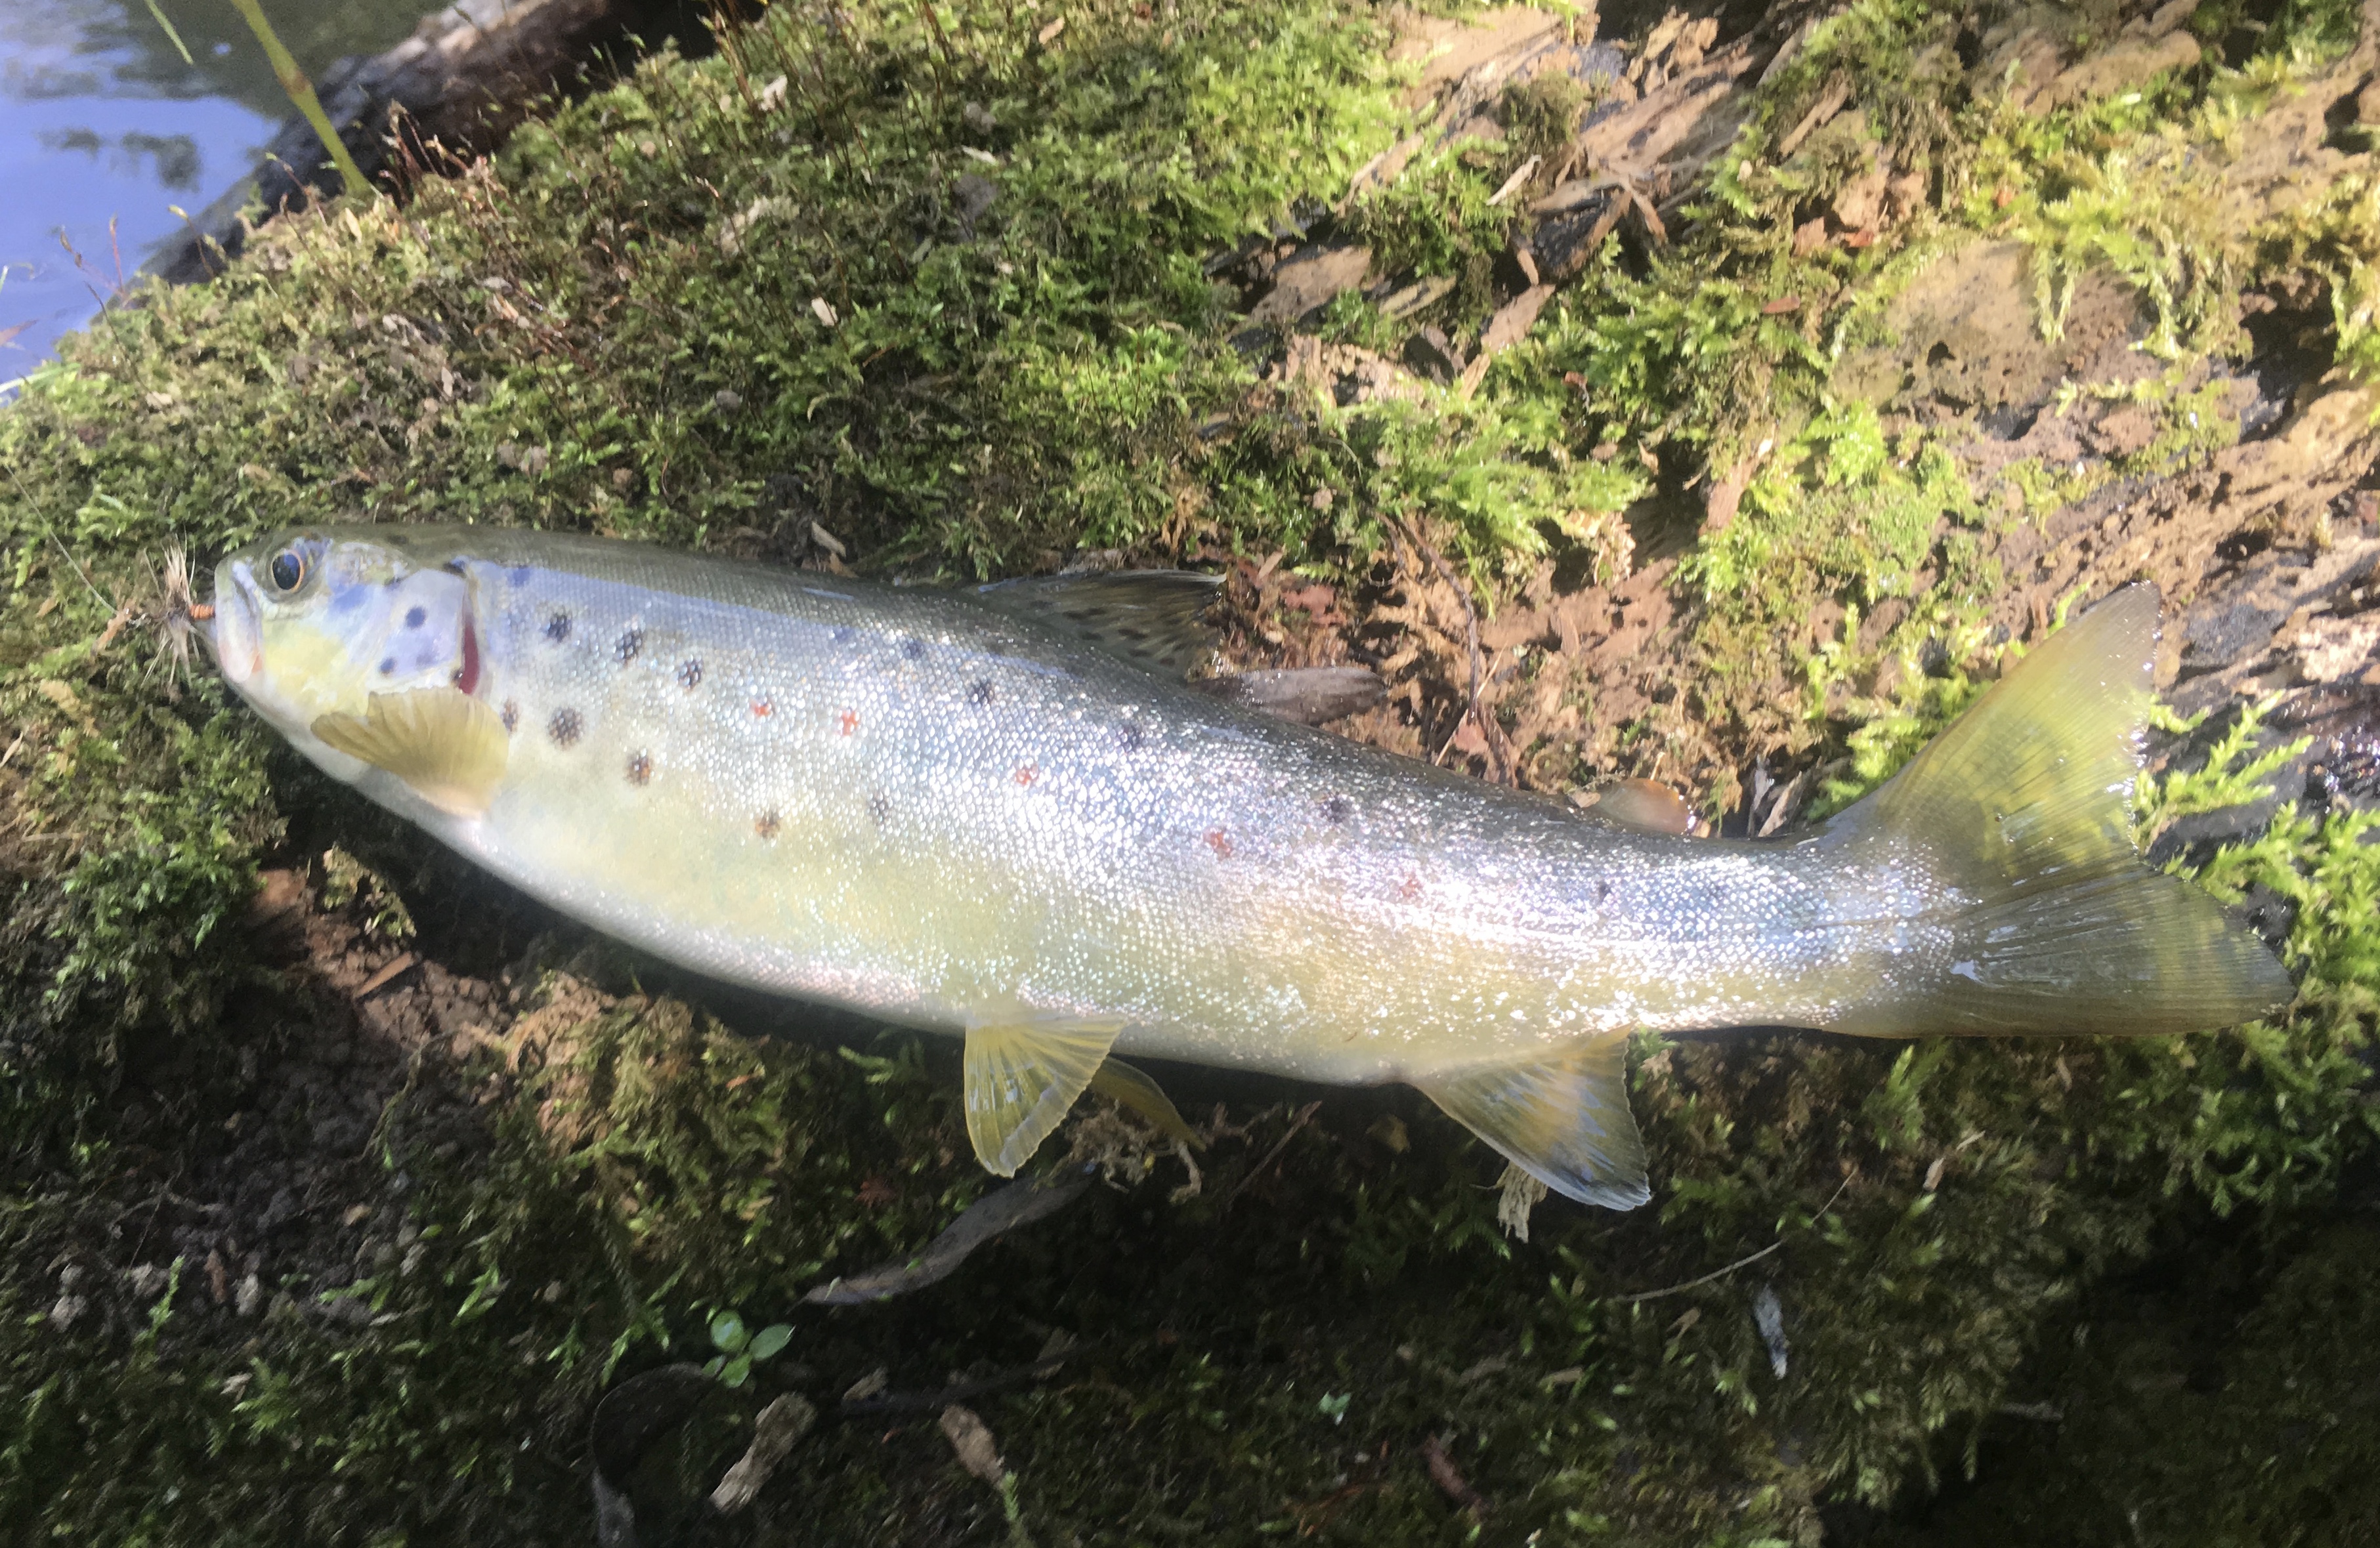 Technical Fly Fishing — “Threading The Needle”